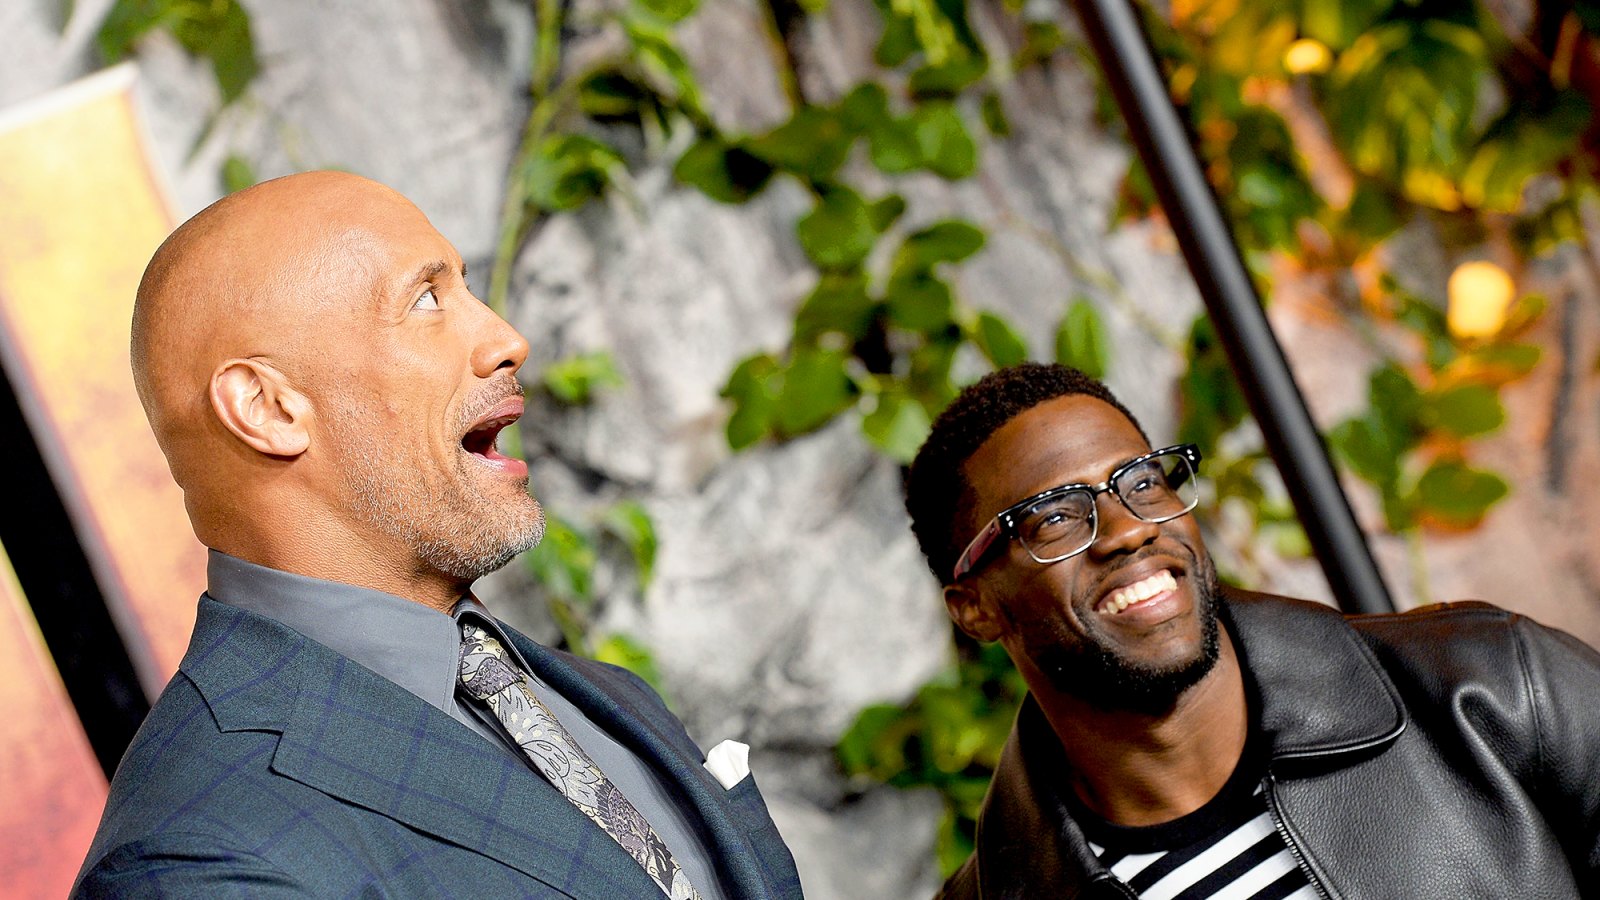 Dwayne ‘The Rock‘ Johnson and Kevin Hart attend the 'Jumanji: Welcome To The Jungle' UK 2017 premiere held at Vue West End in London, England.